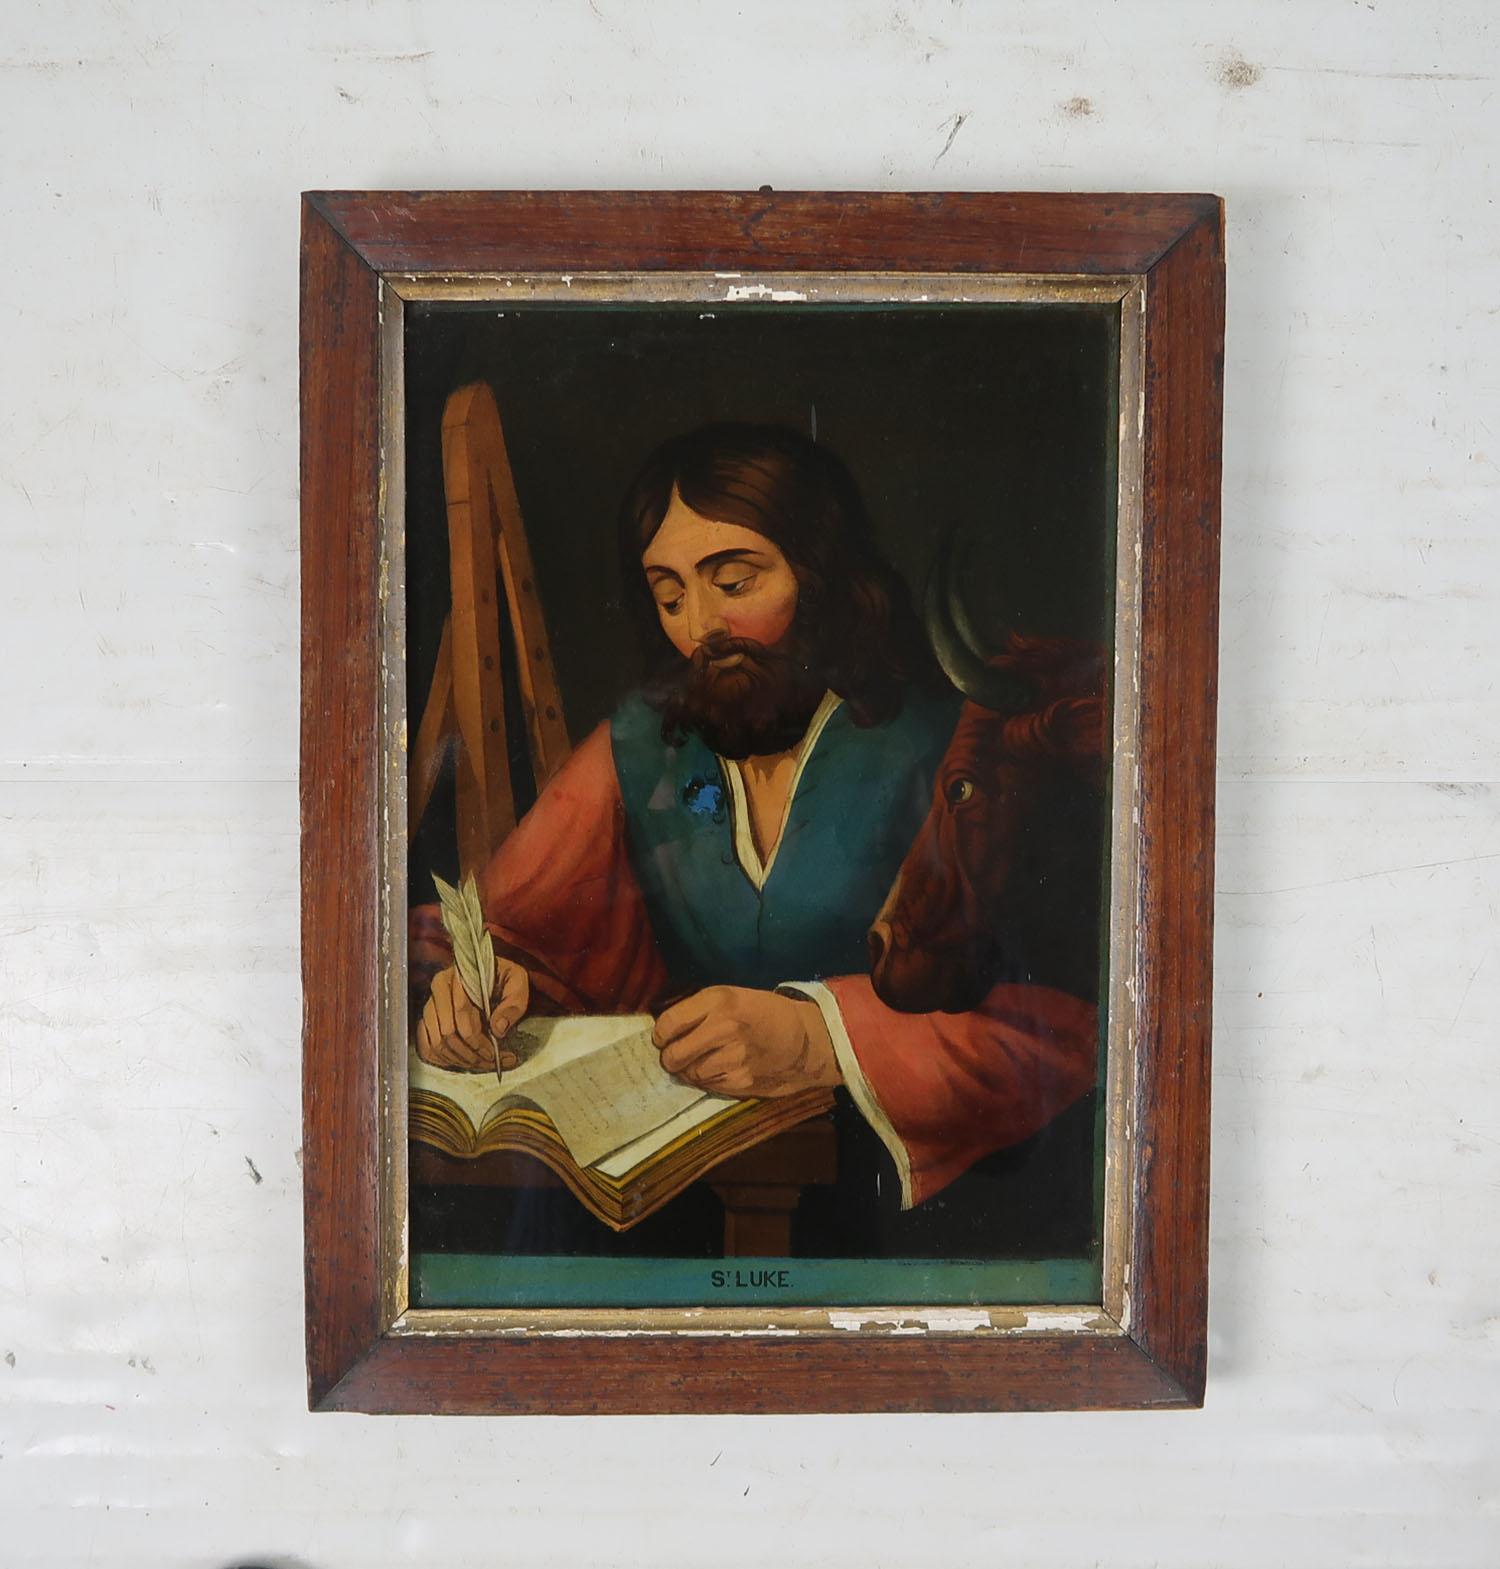 Wonderful naive painting of St. Luke.

Artist unknown

Revese glass painted

Original slightly distressed tropical hardwood and gesso frame.

Rather crude old re-paint to the button area of the blue garment. See image

The measurement given is the